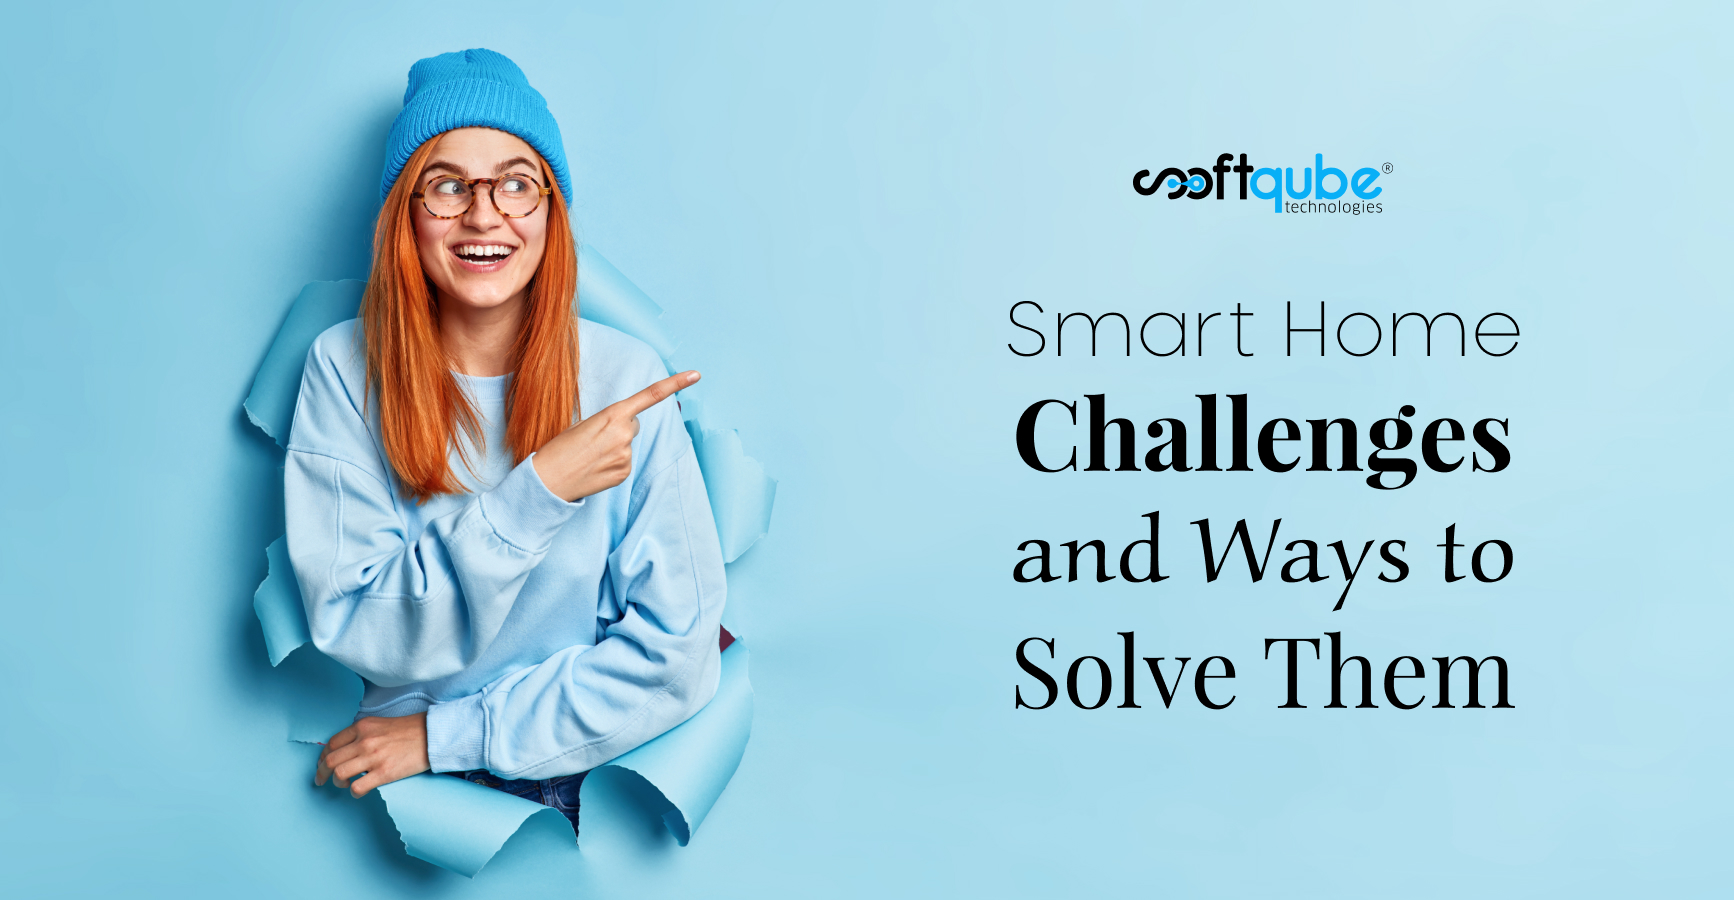 Smart Home Challenges and Ways to Solve Them